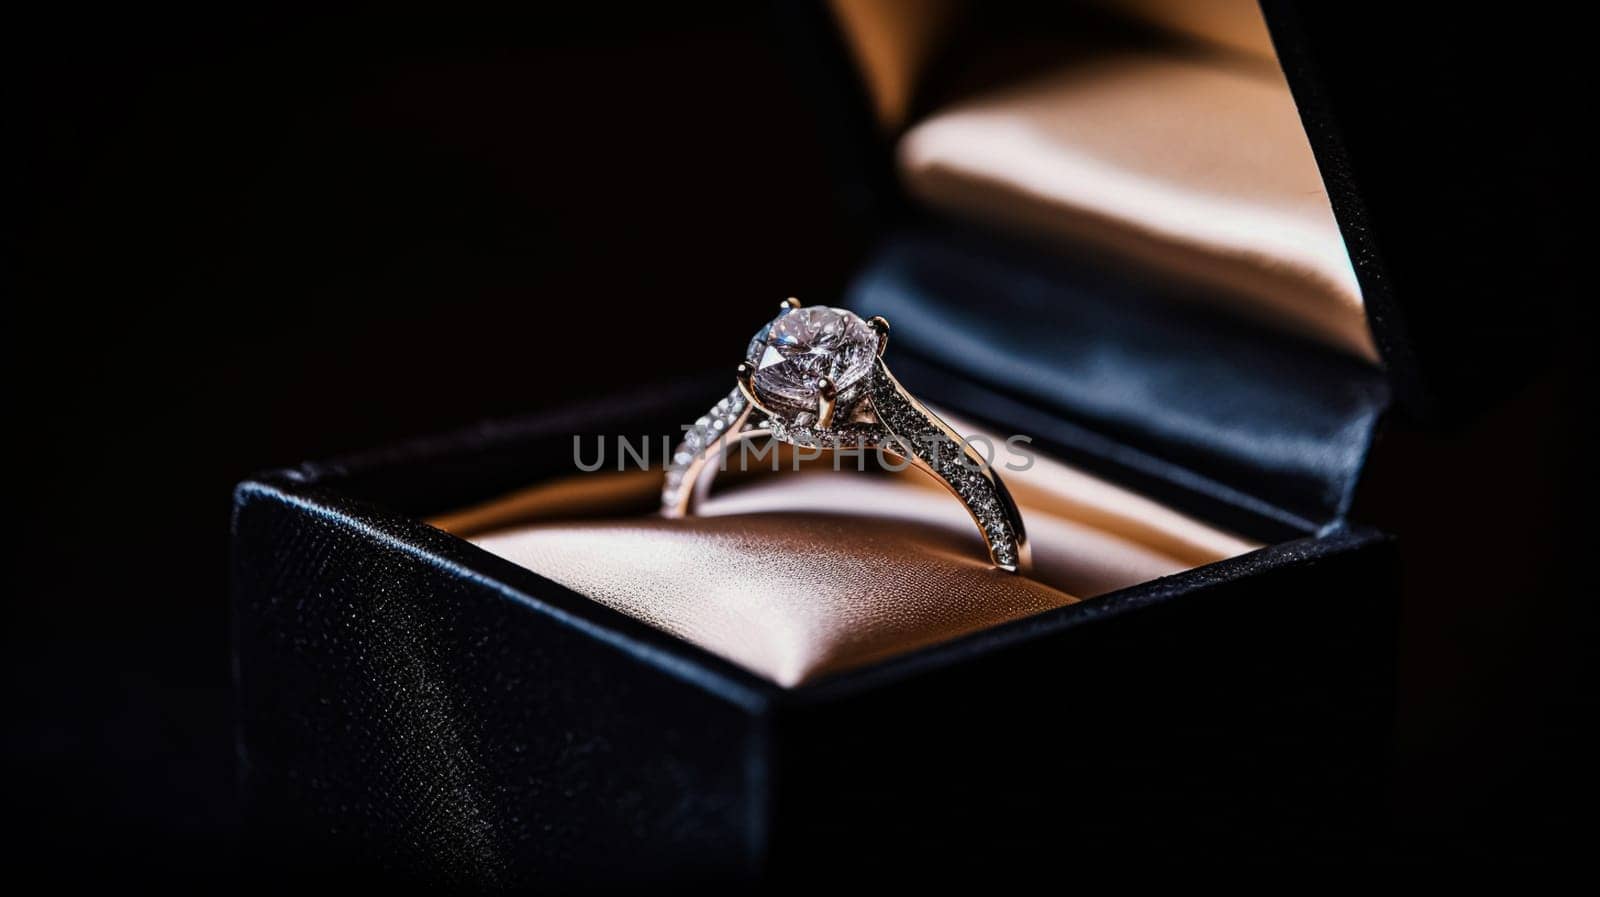 Jewellery, proposal and holiday gift, diamond engagement ring, symbol of love, romance and commitment inspiration